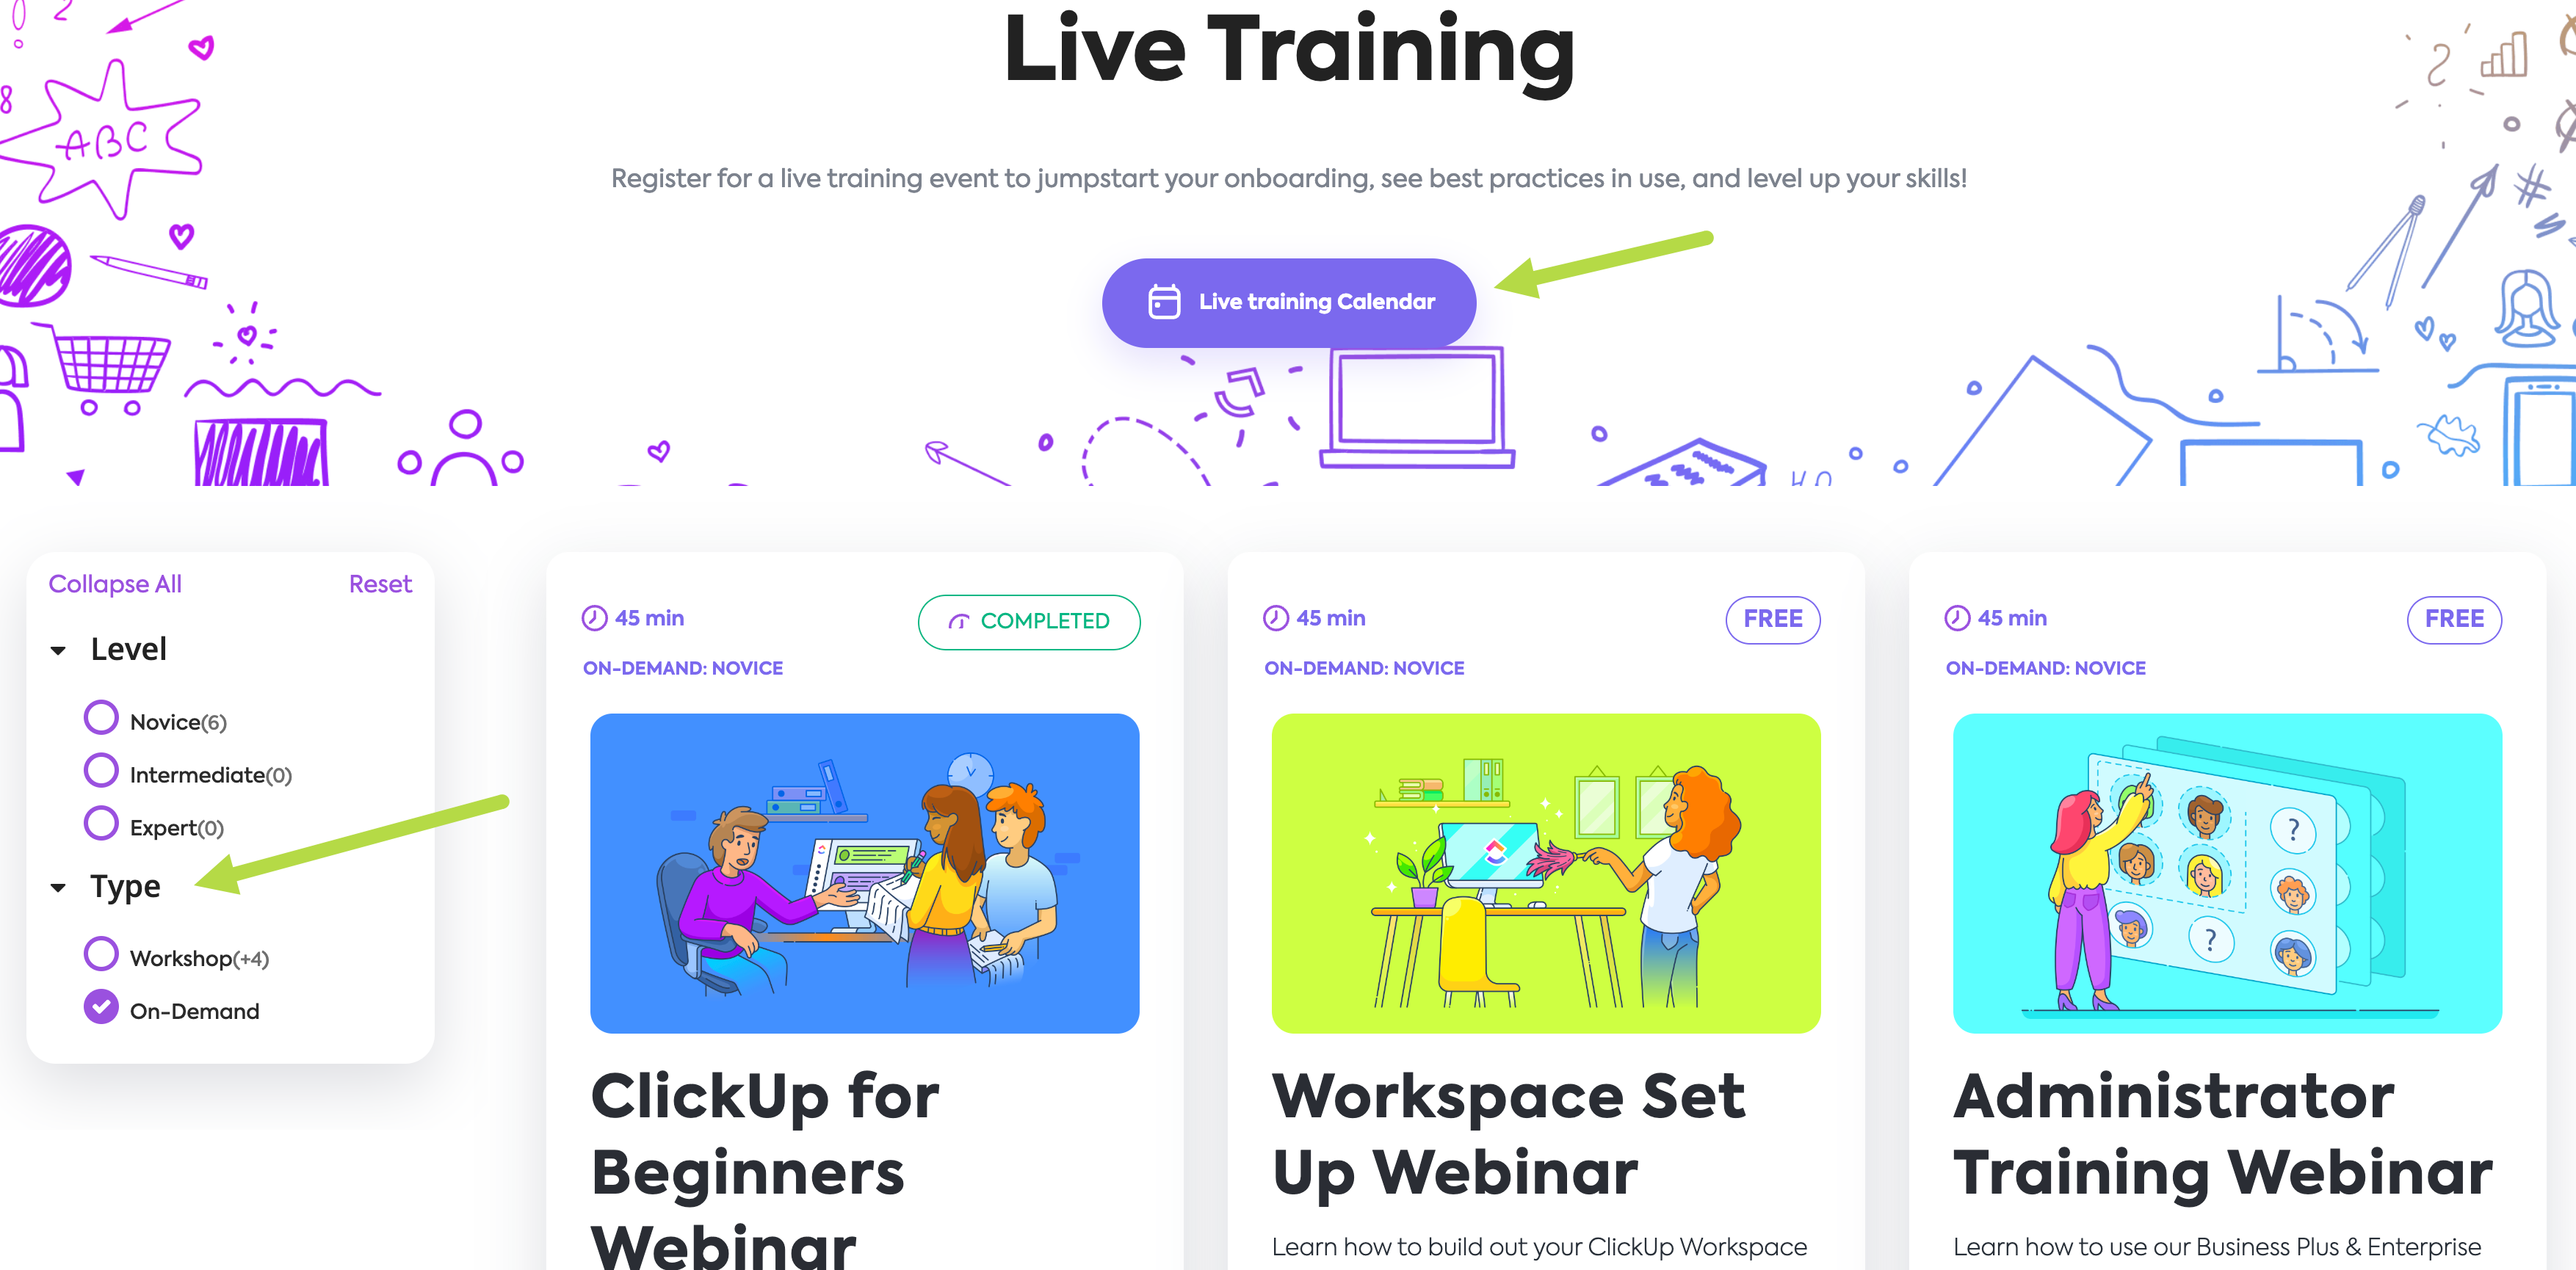 Screenshot showing the Live Training page, the Level and Type filter, and the Live training Calendar button.